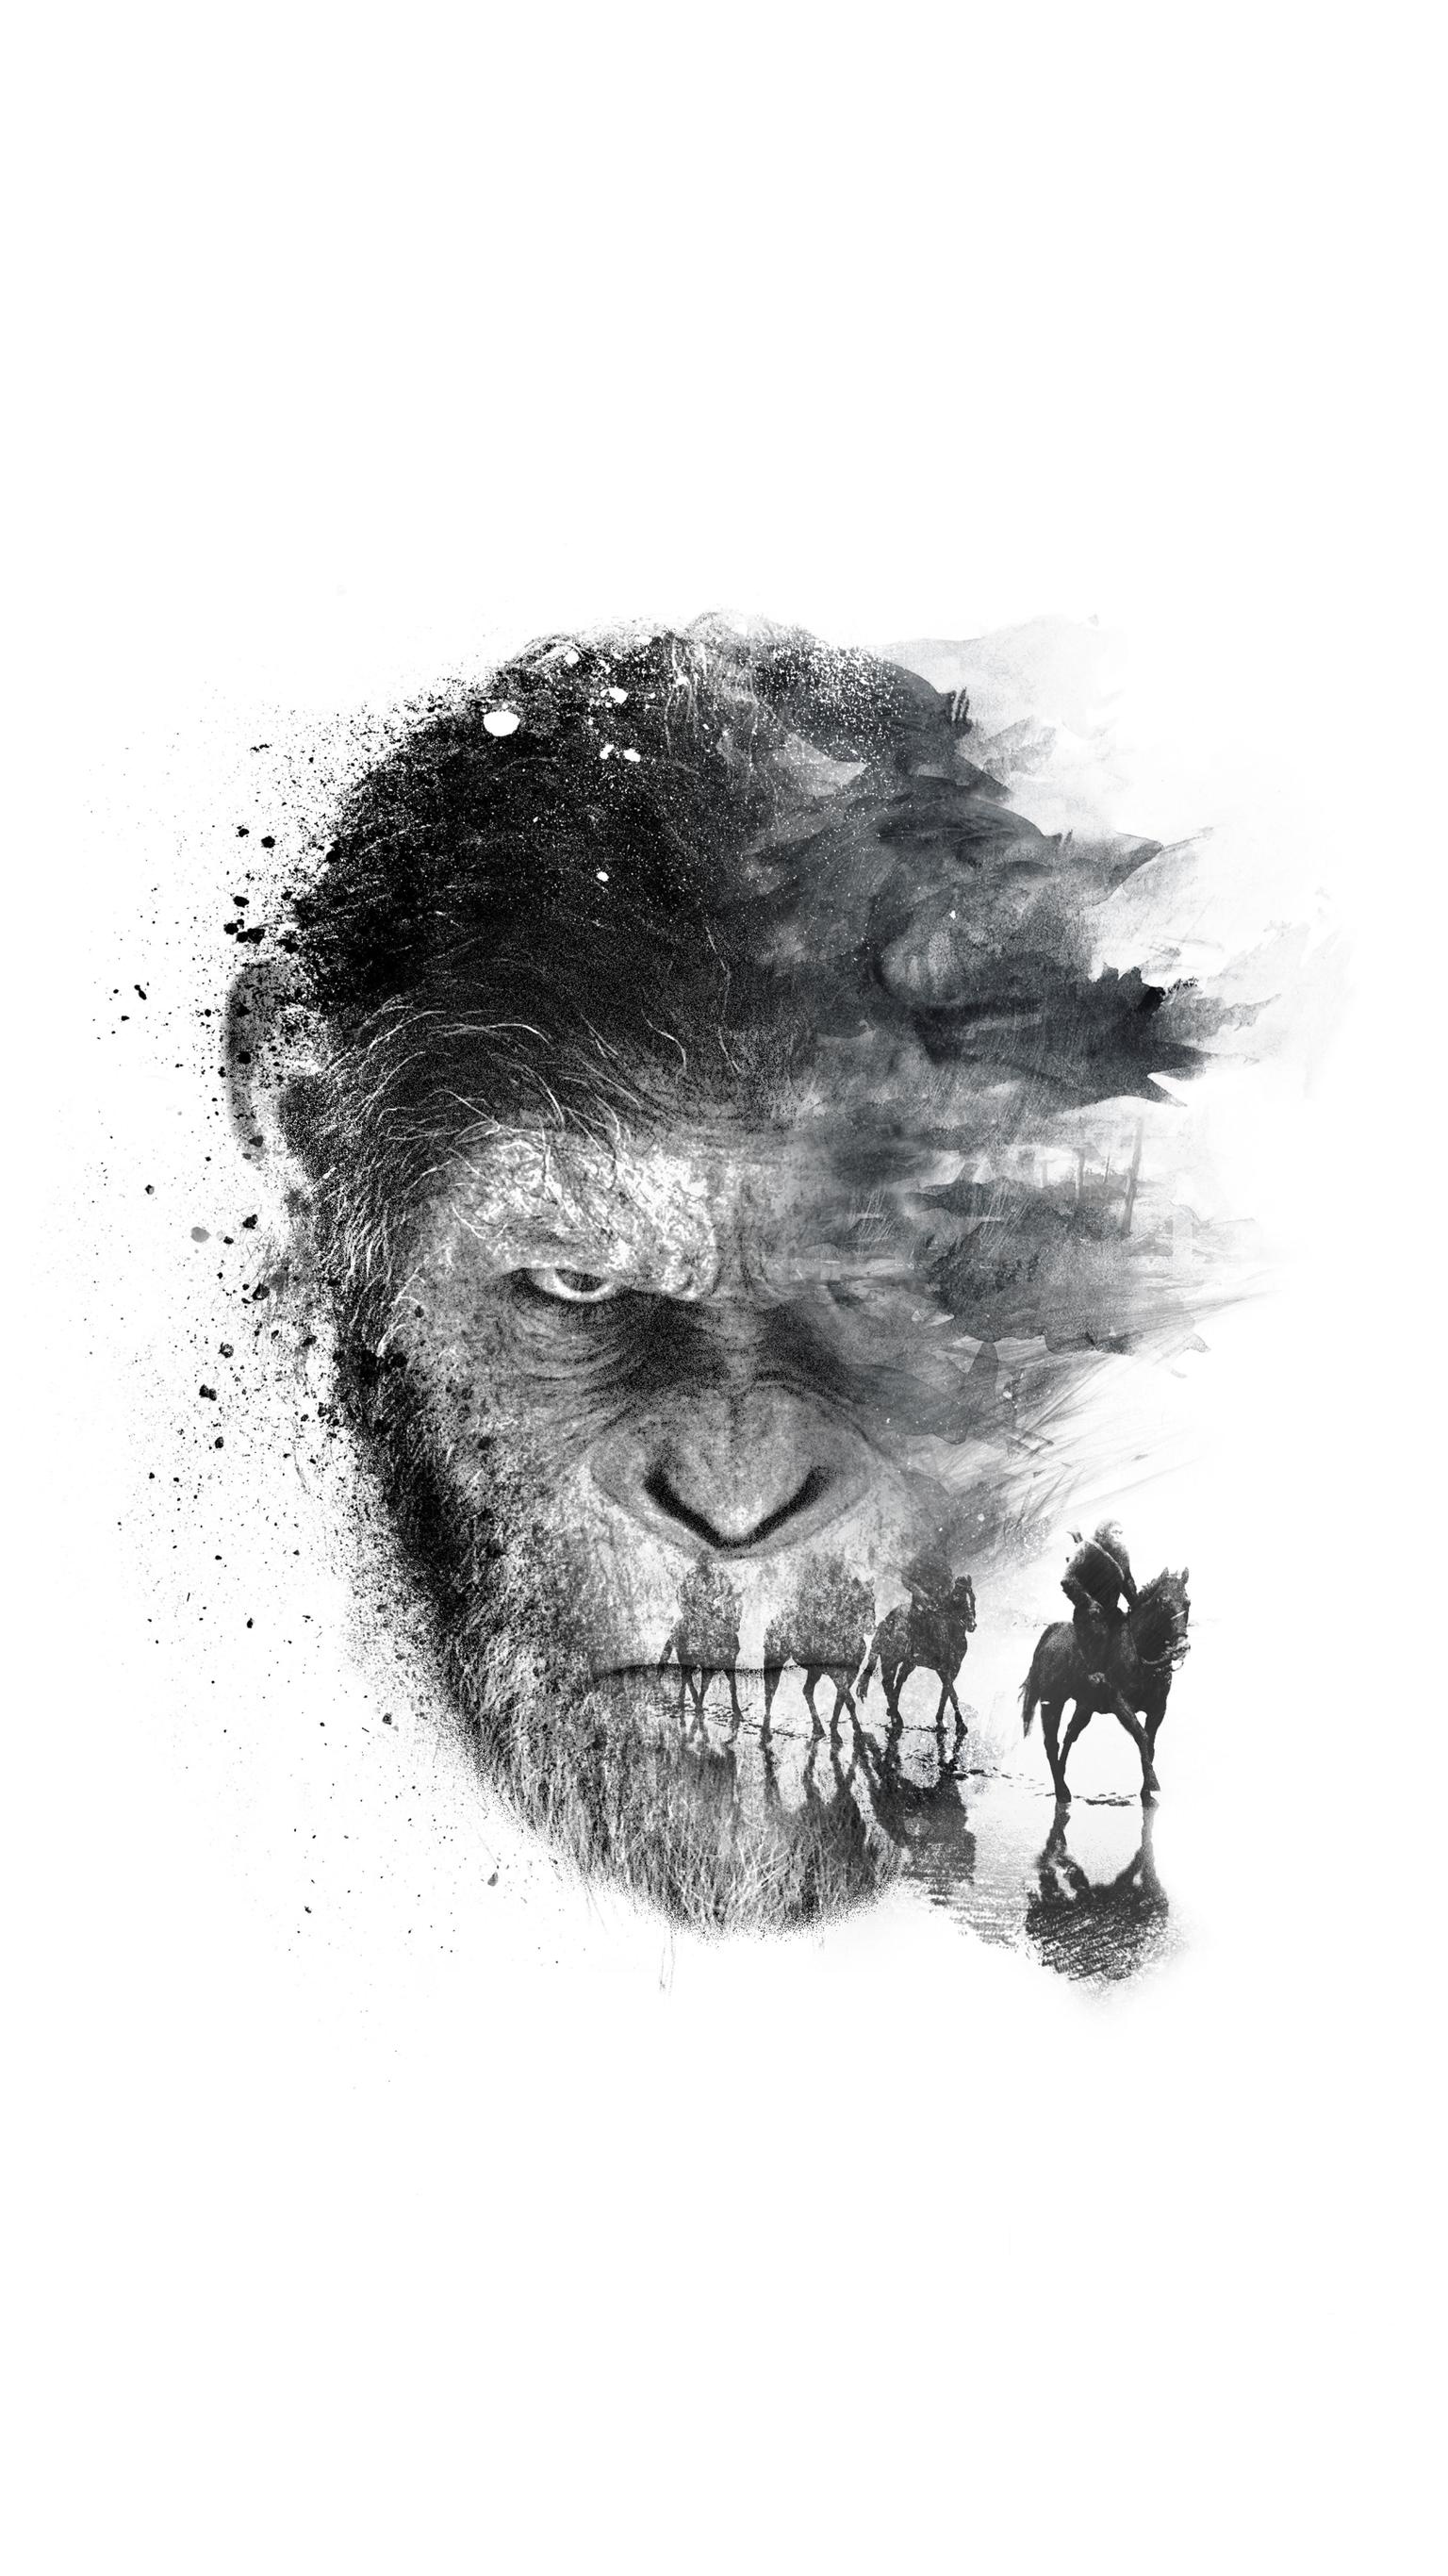 Planet of the Apes, Breathtaking wallpapers, Apes in action, Stunning visuals, 1540x2740 HD Handy